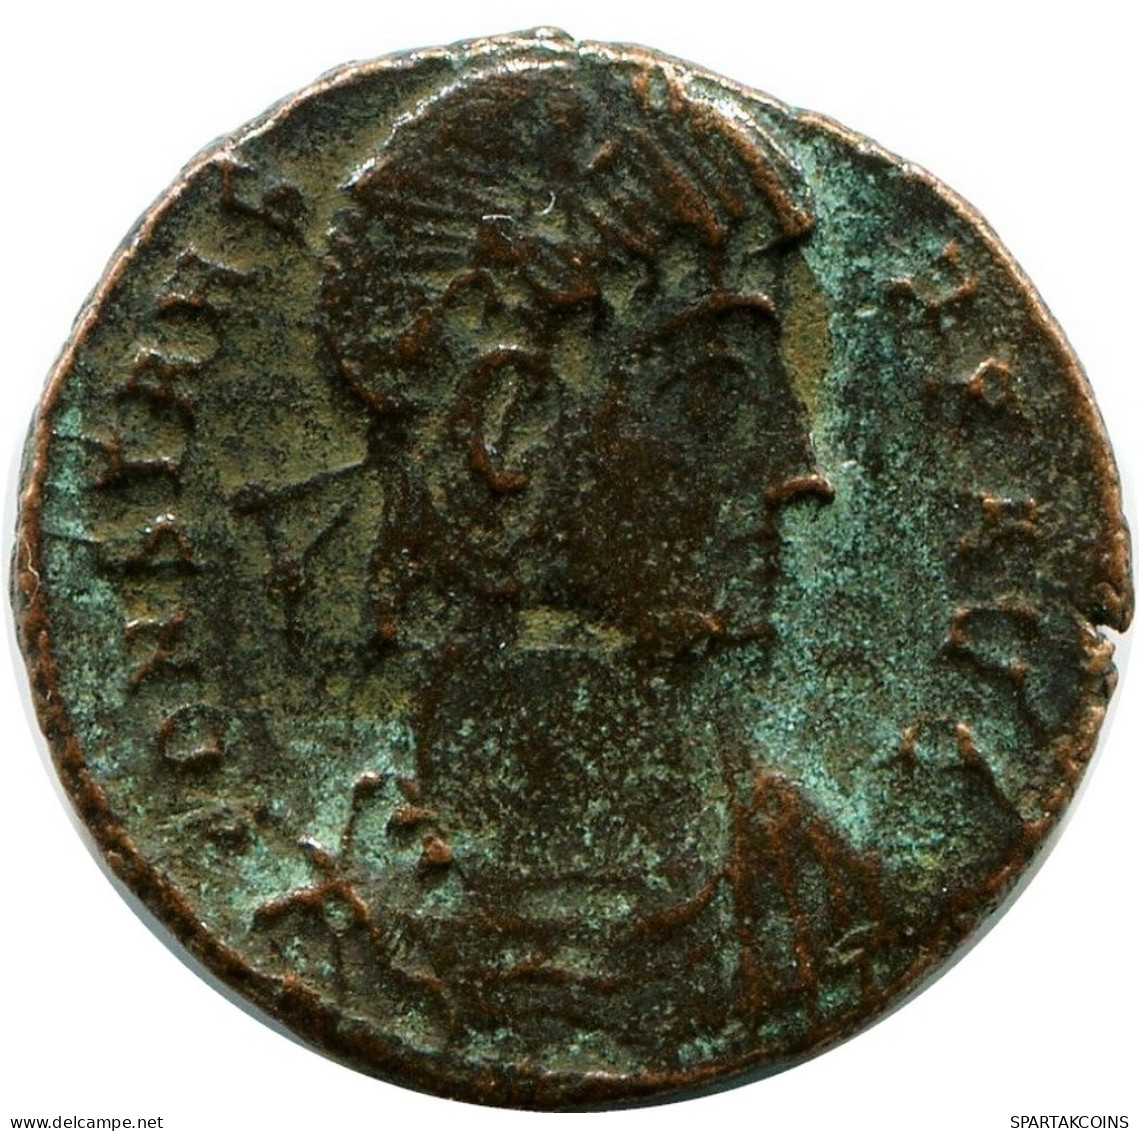 CONSTANS MINTED IN THESSALONICA FOUND IN IHNASYAH HOARD EGYPT #ANC11895.14.E.A - L'Empire Chrétien (307 à 363)